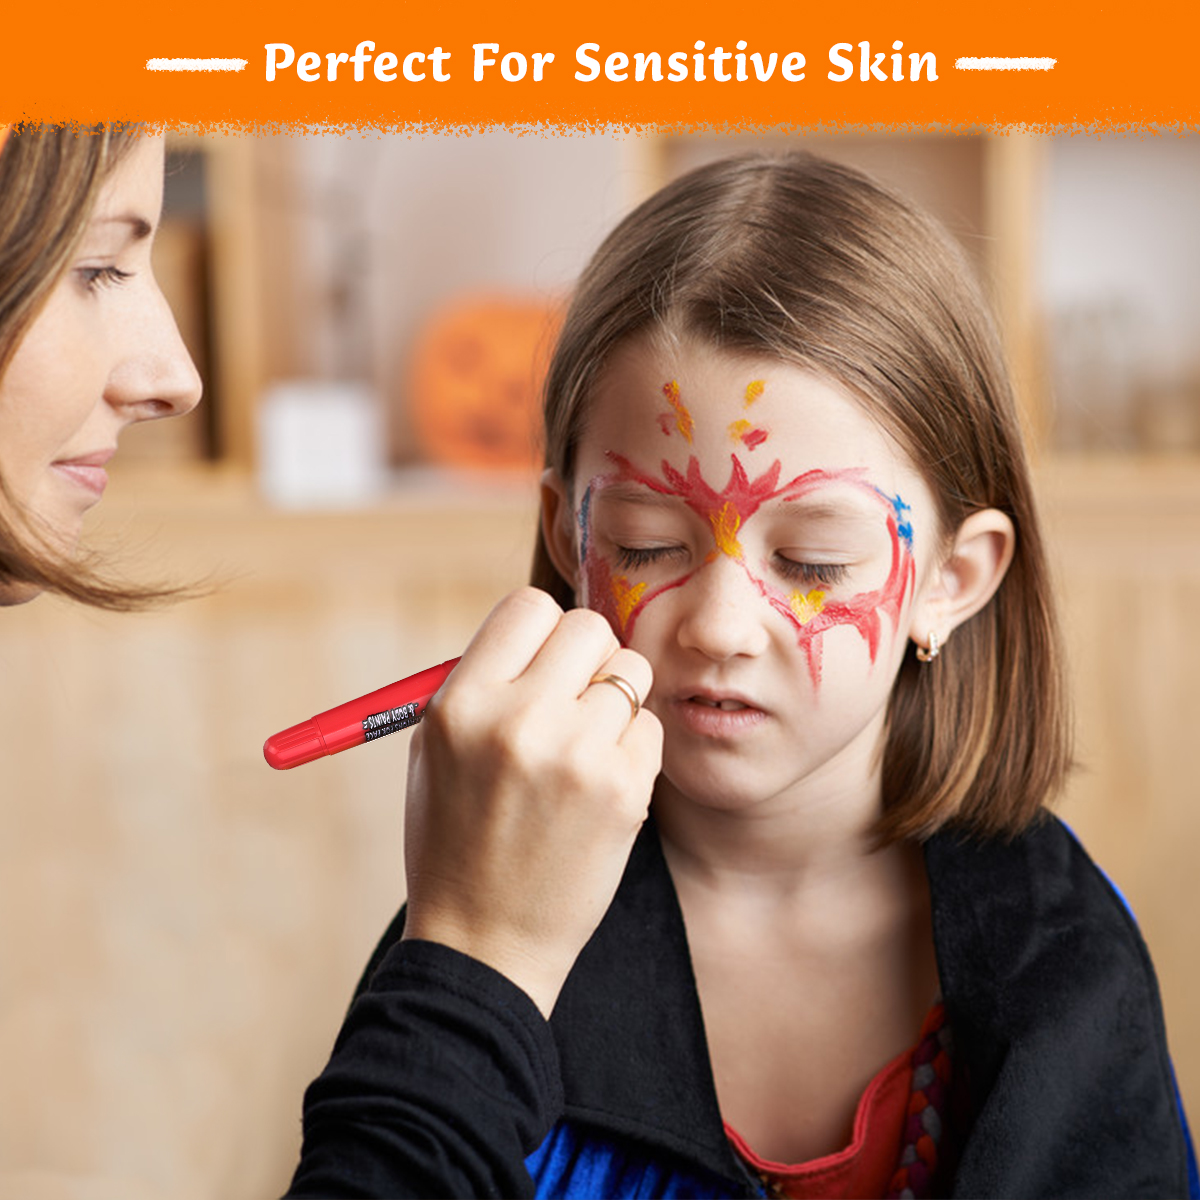 Face Painting Kits for Kids - Water Based Face Paint Kits 16